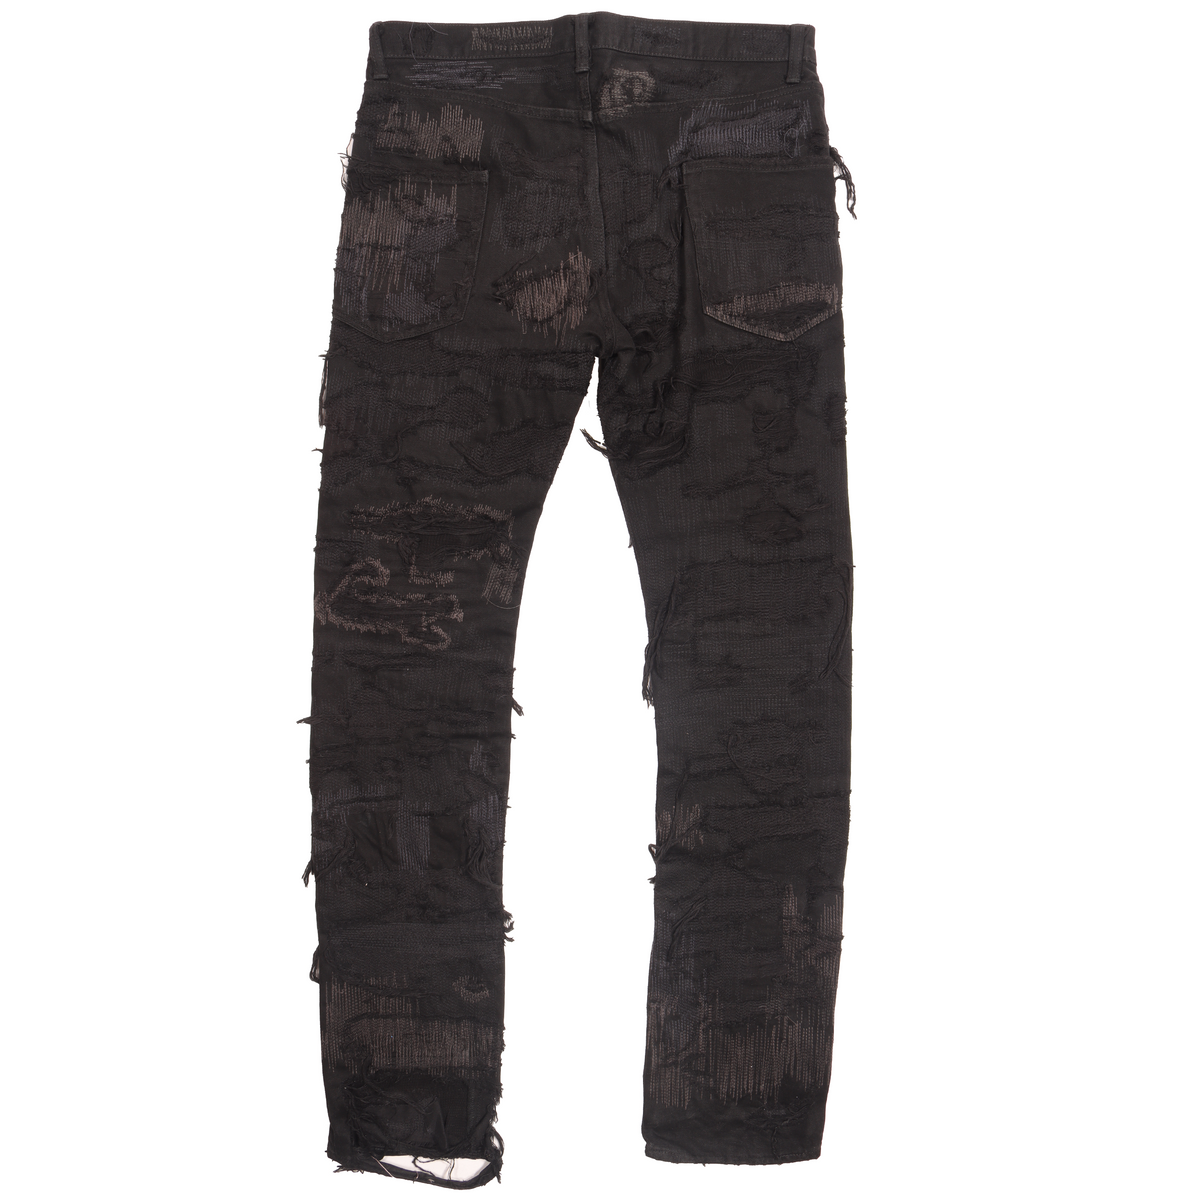 Undercover 85 Denim - AW05 'ARTS AND CRAFTS' BY JUN TAKAHASHI – Justin ...